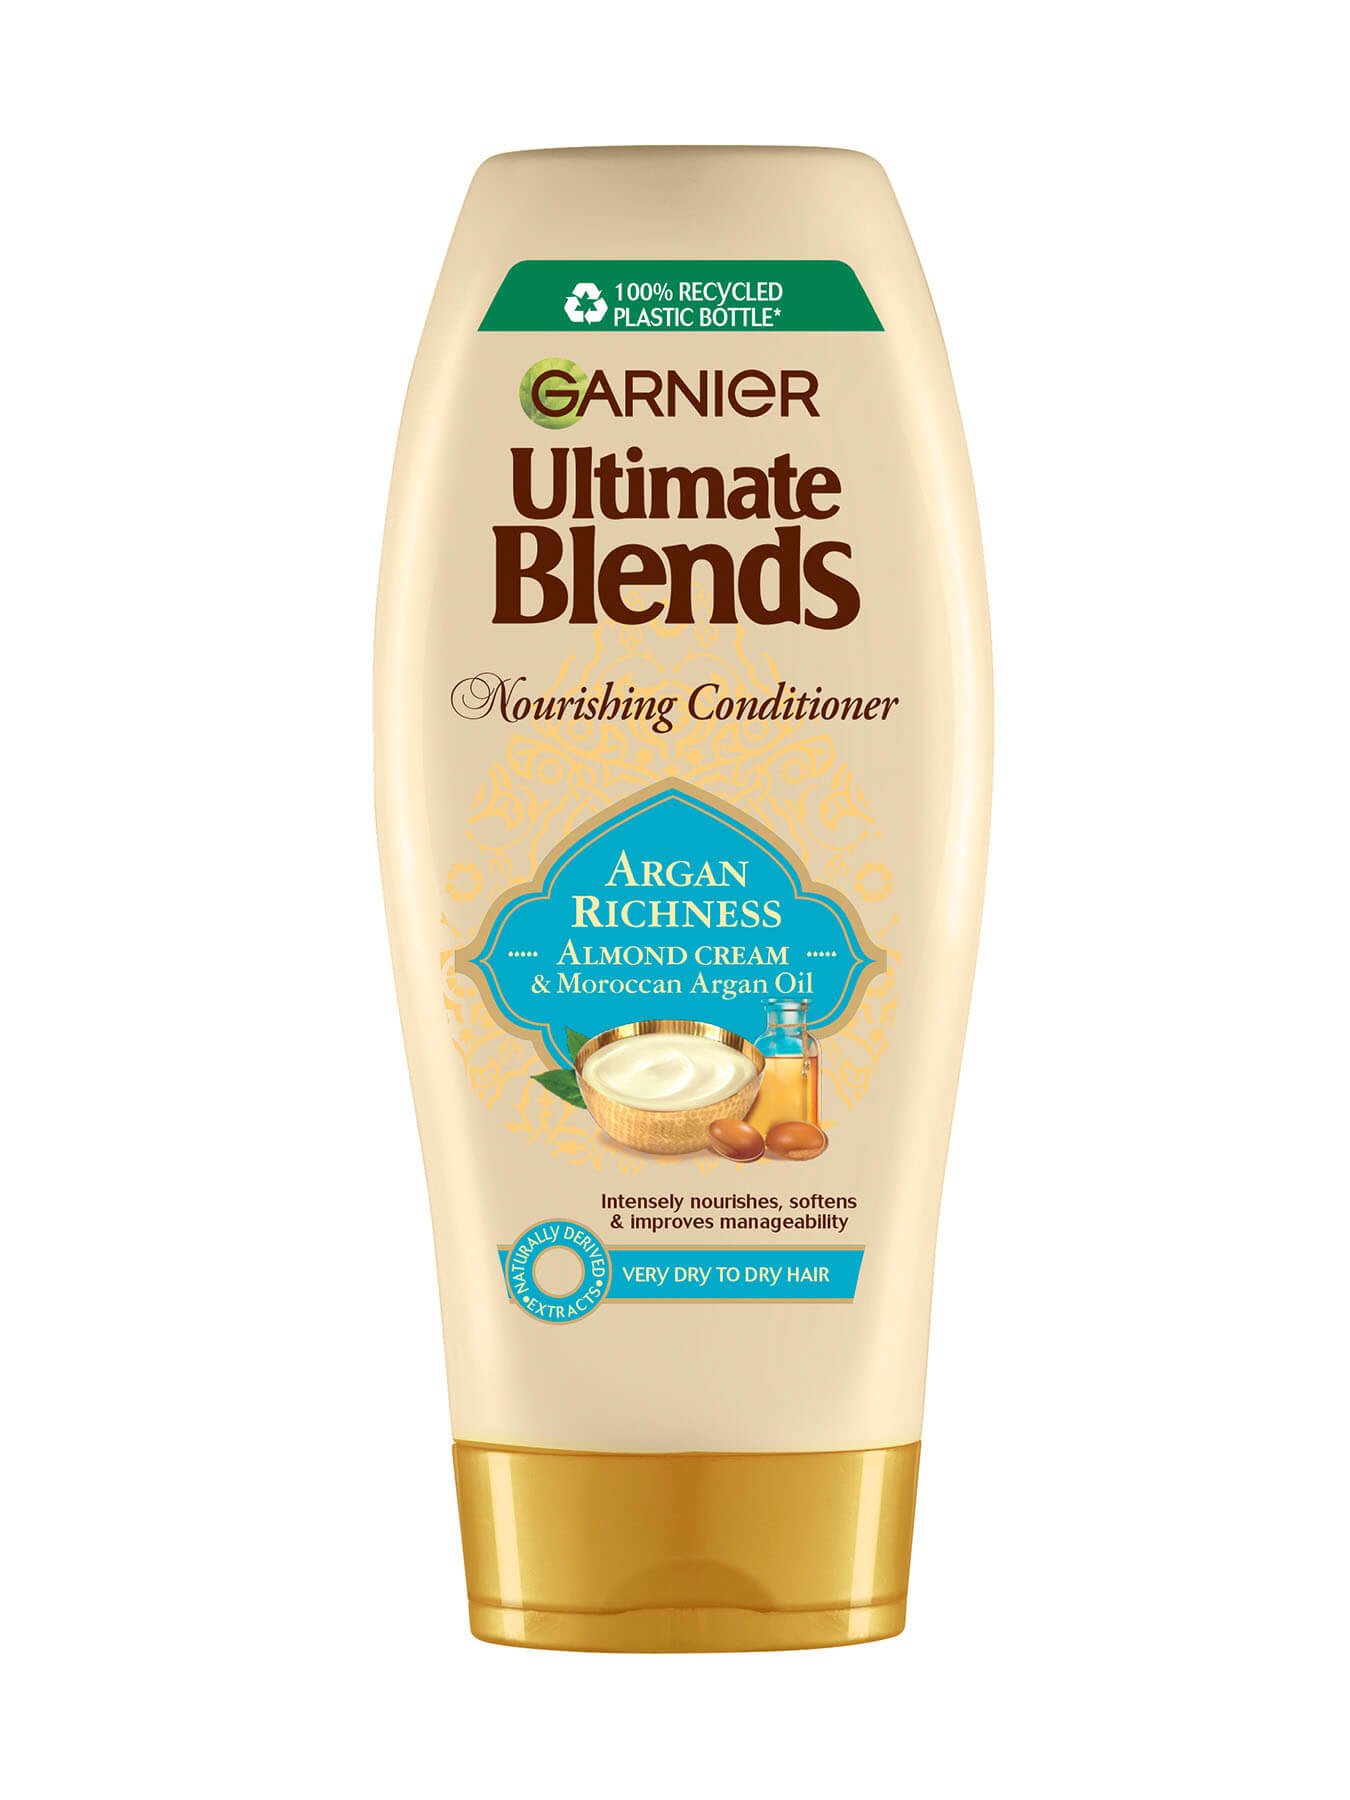 Ultimate Blends Argan Richness Conditioner Front of pack